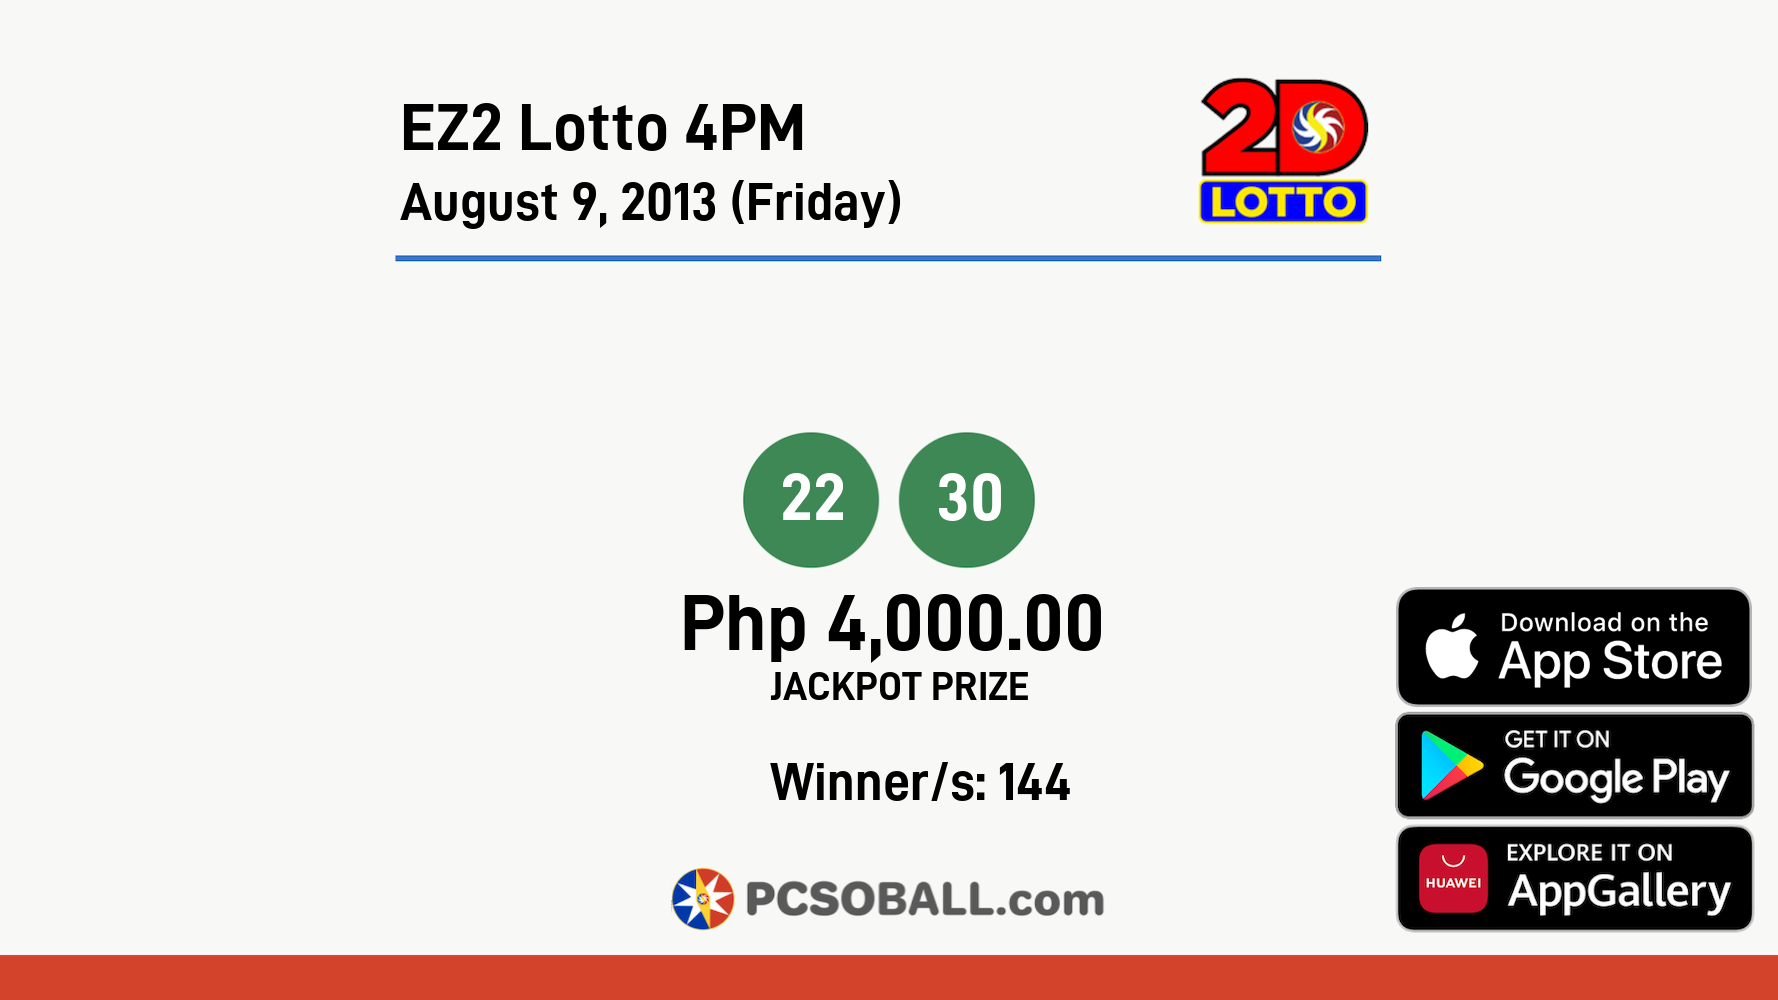 EZ2 Lotto 4PM August 9, 2013 (Friday) Result